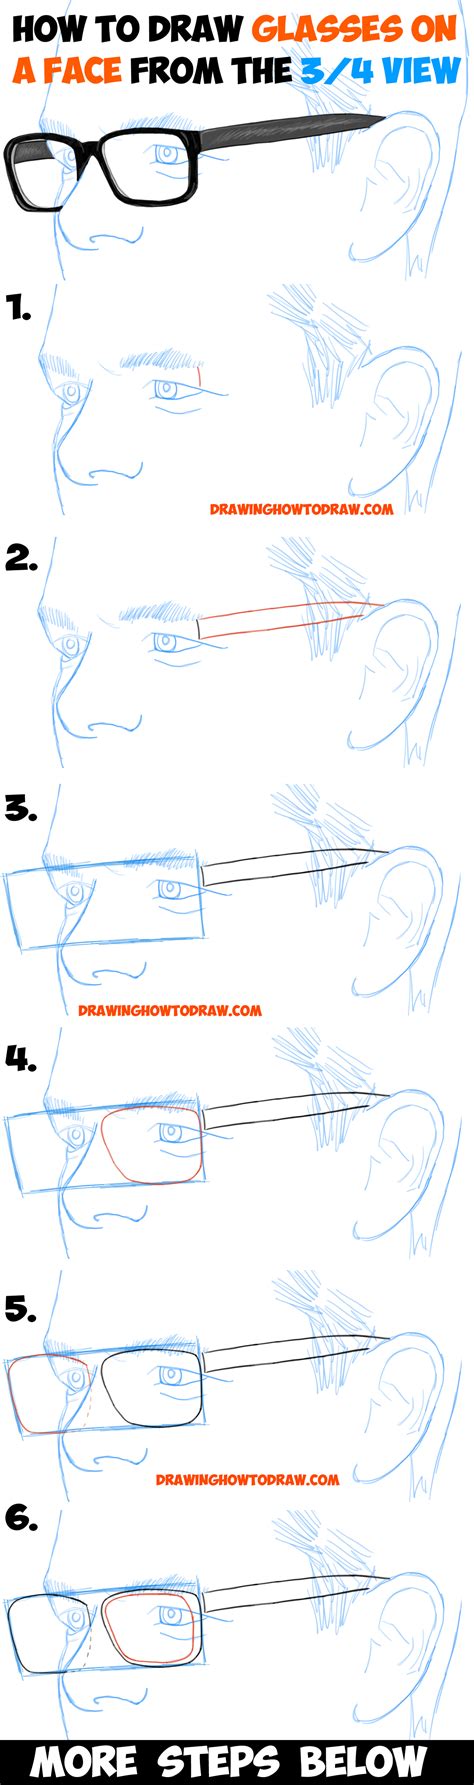 How To Draw Glasses On A Persons Face From All Angles